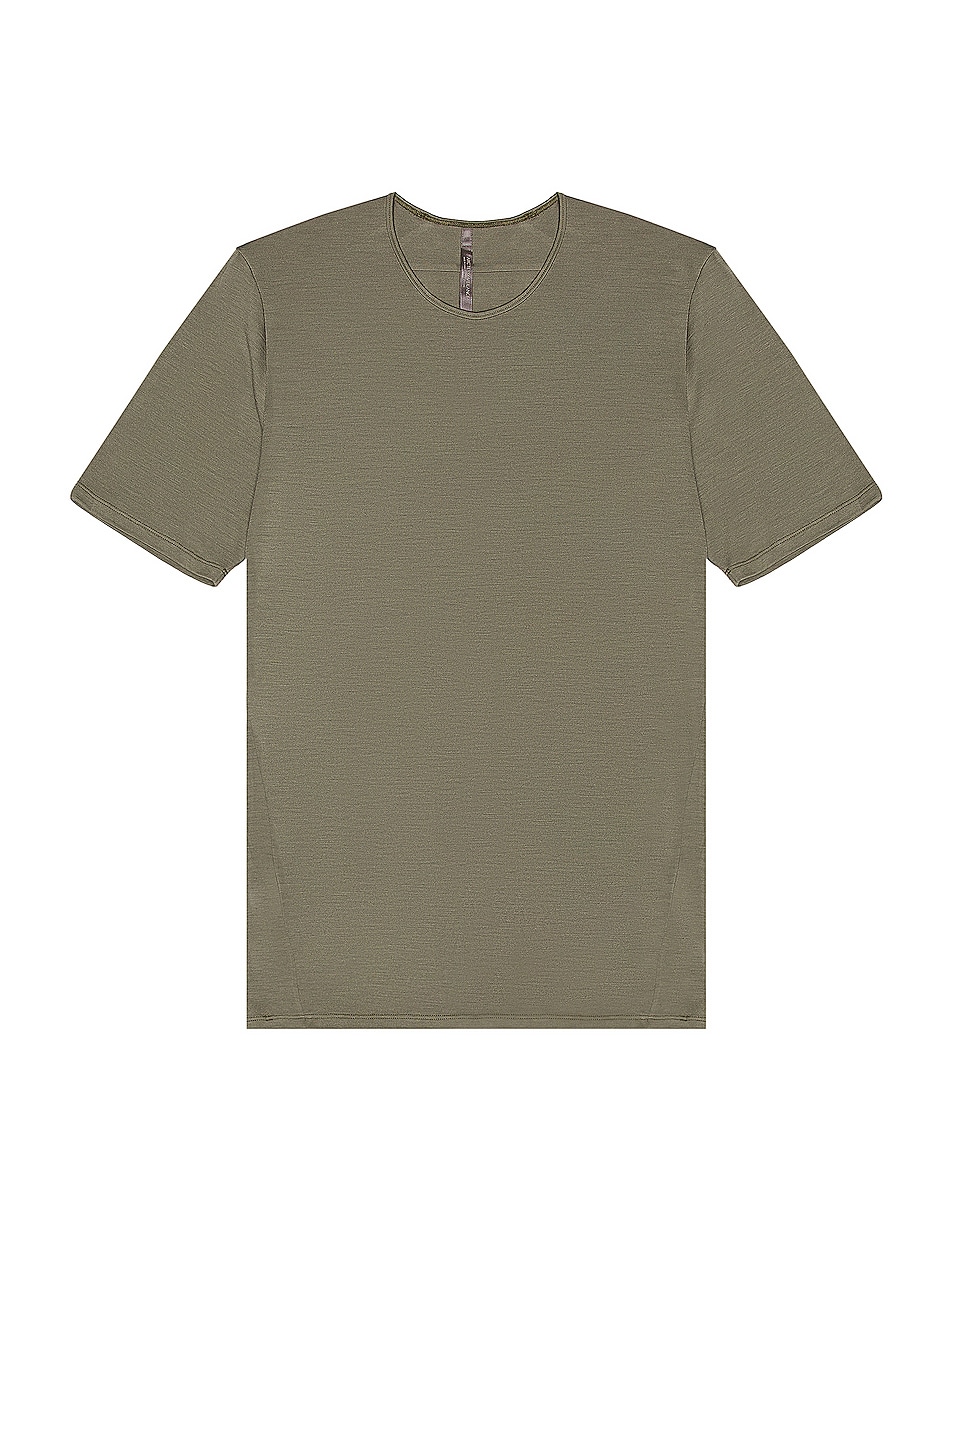 Image 1 of Veilance Frame Shirt in Moon Dust